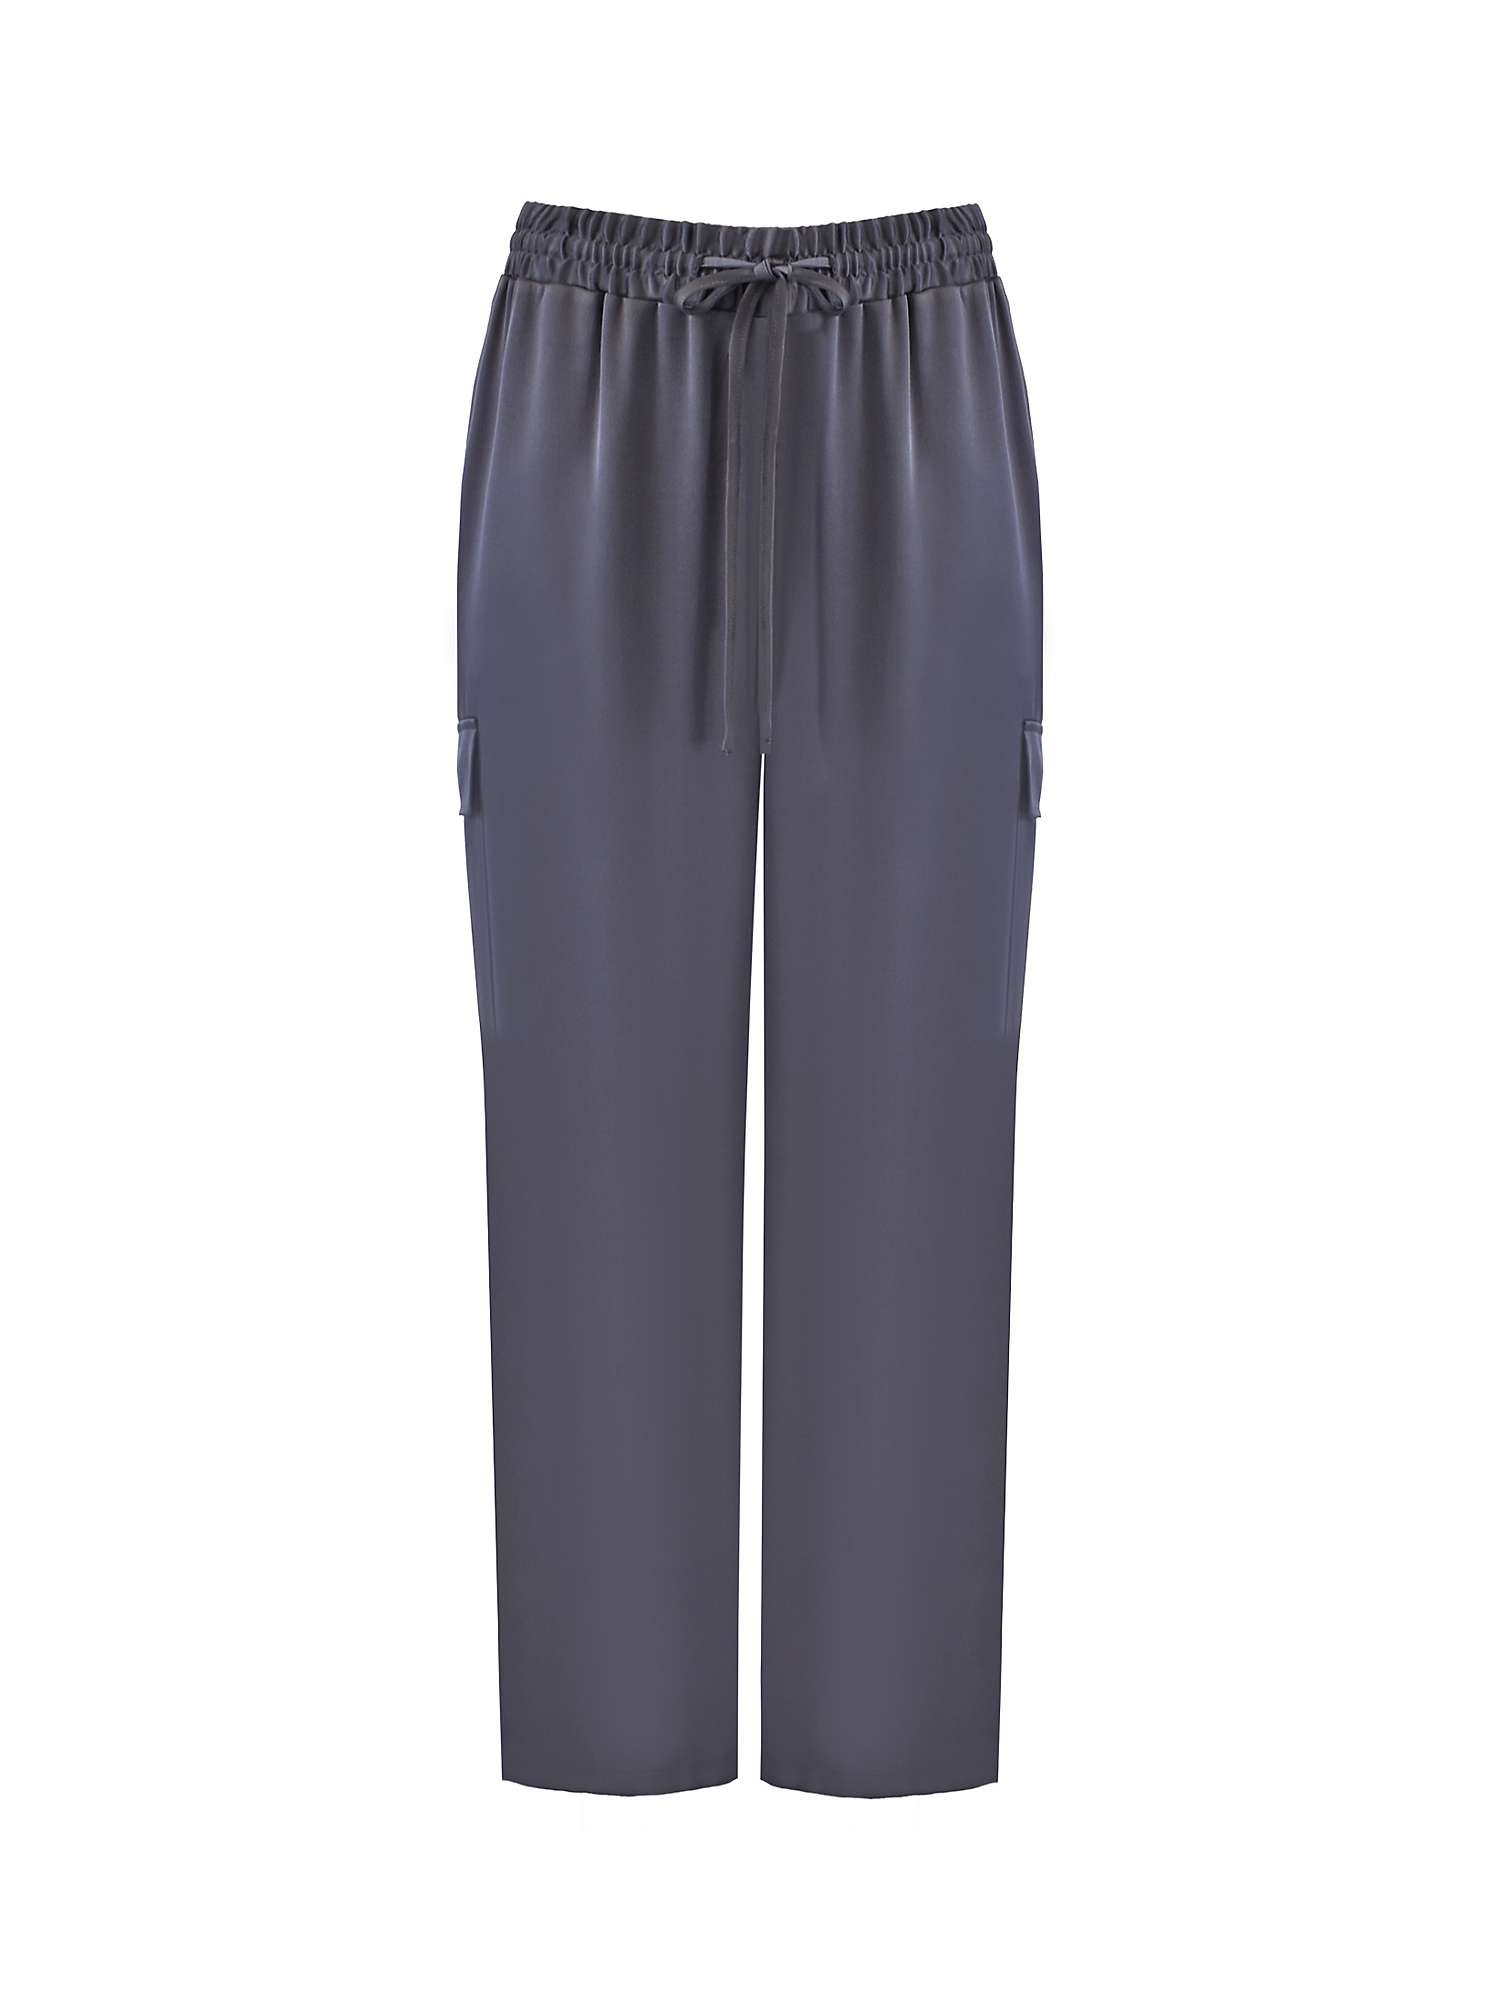 Buy Live Unlimited Curve Satin Cargo Trousers, Grey Online at johnlewis.com